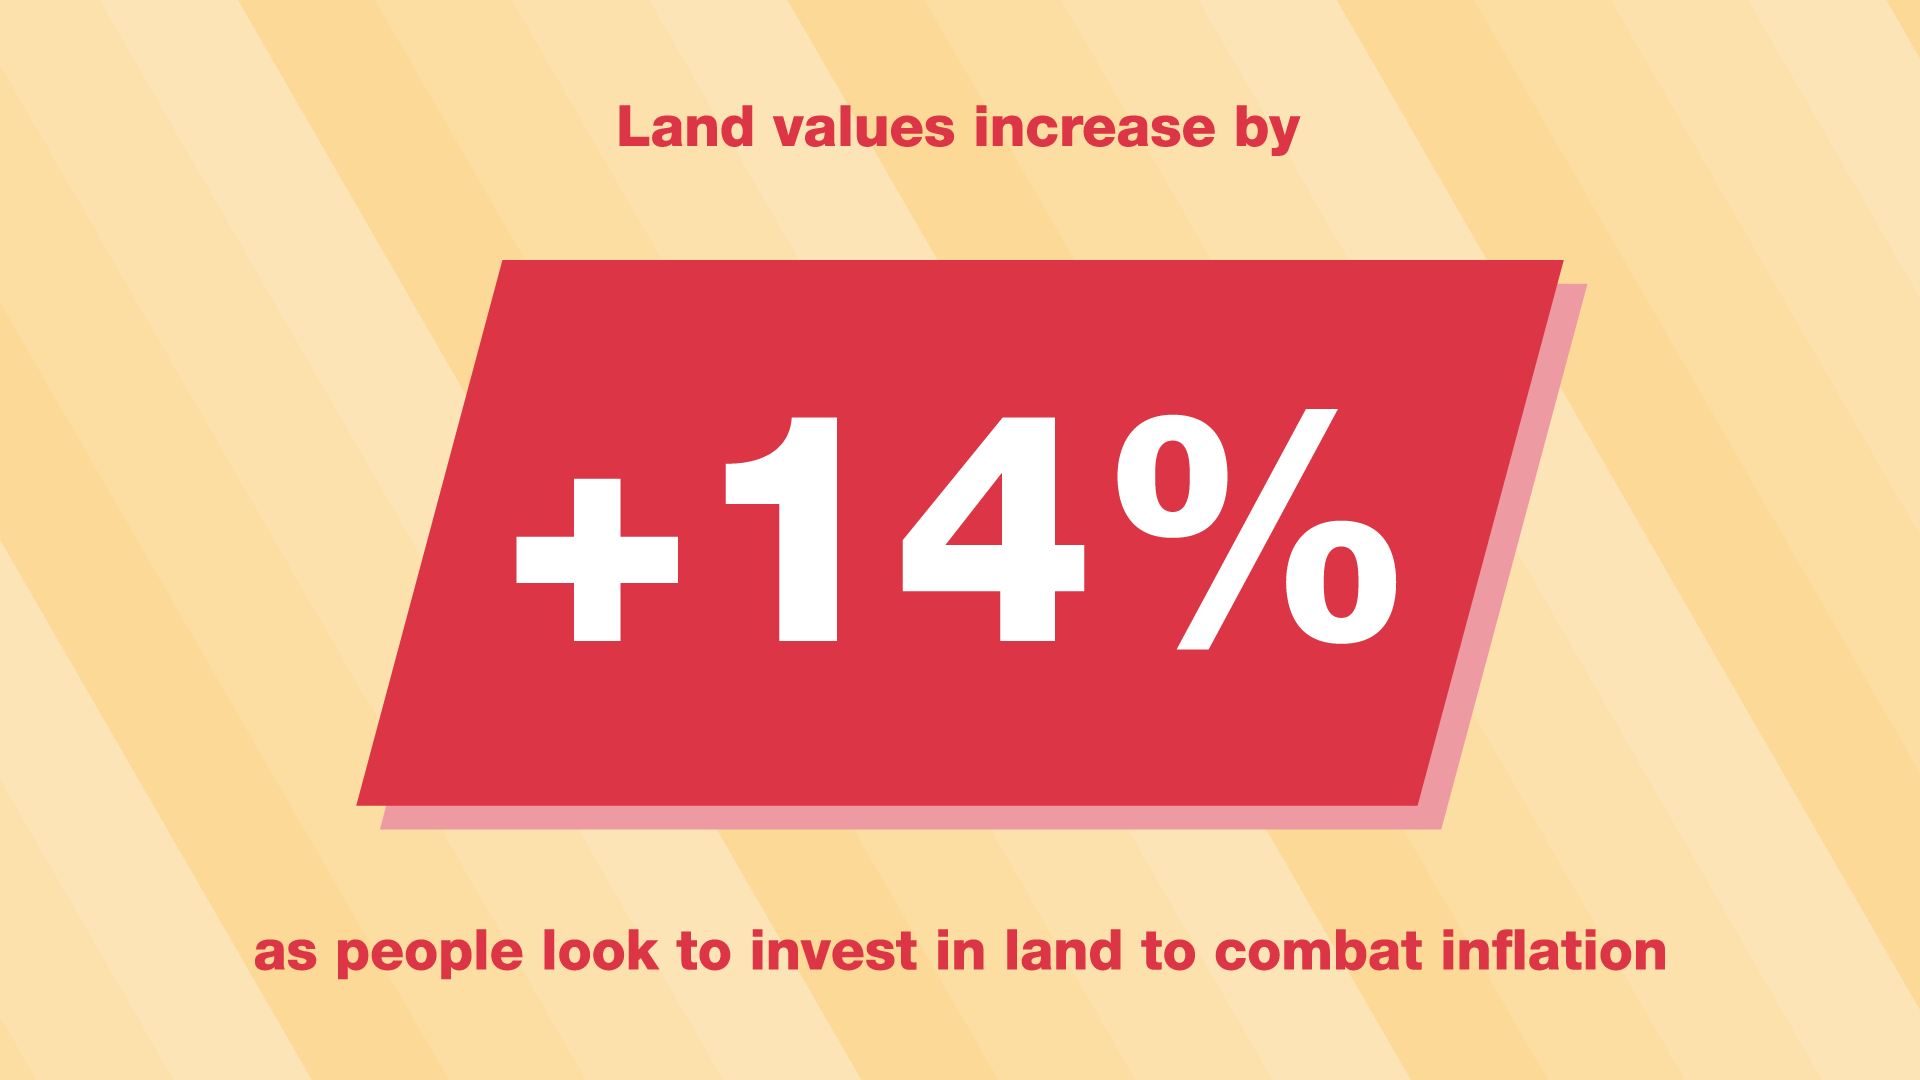 Land values increase by 14%